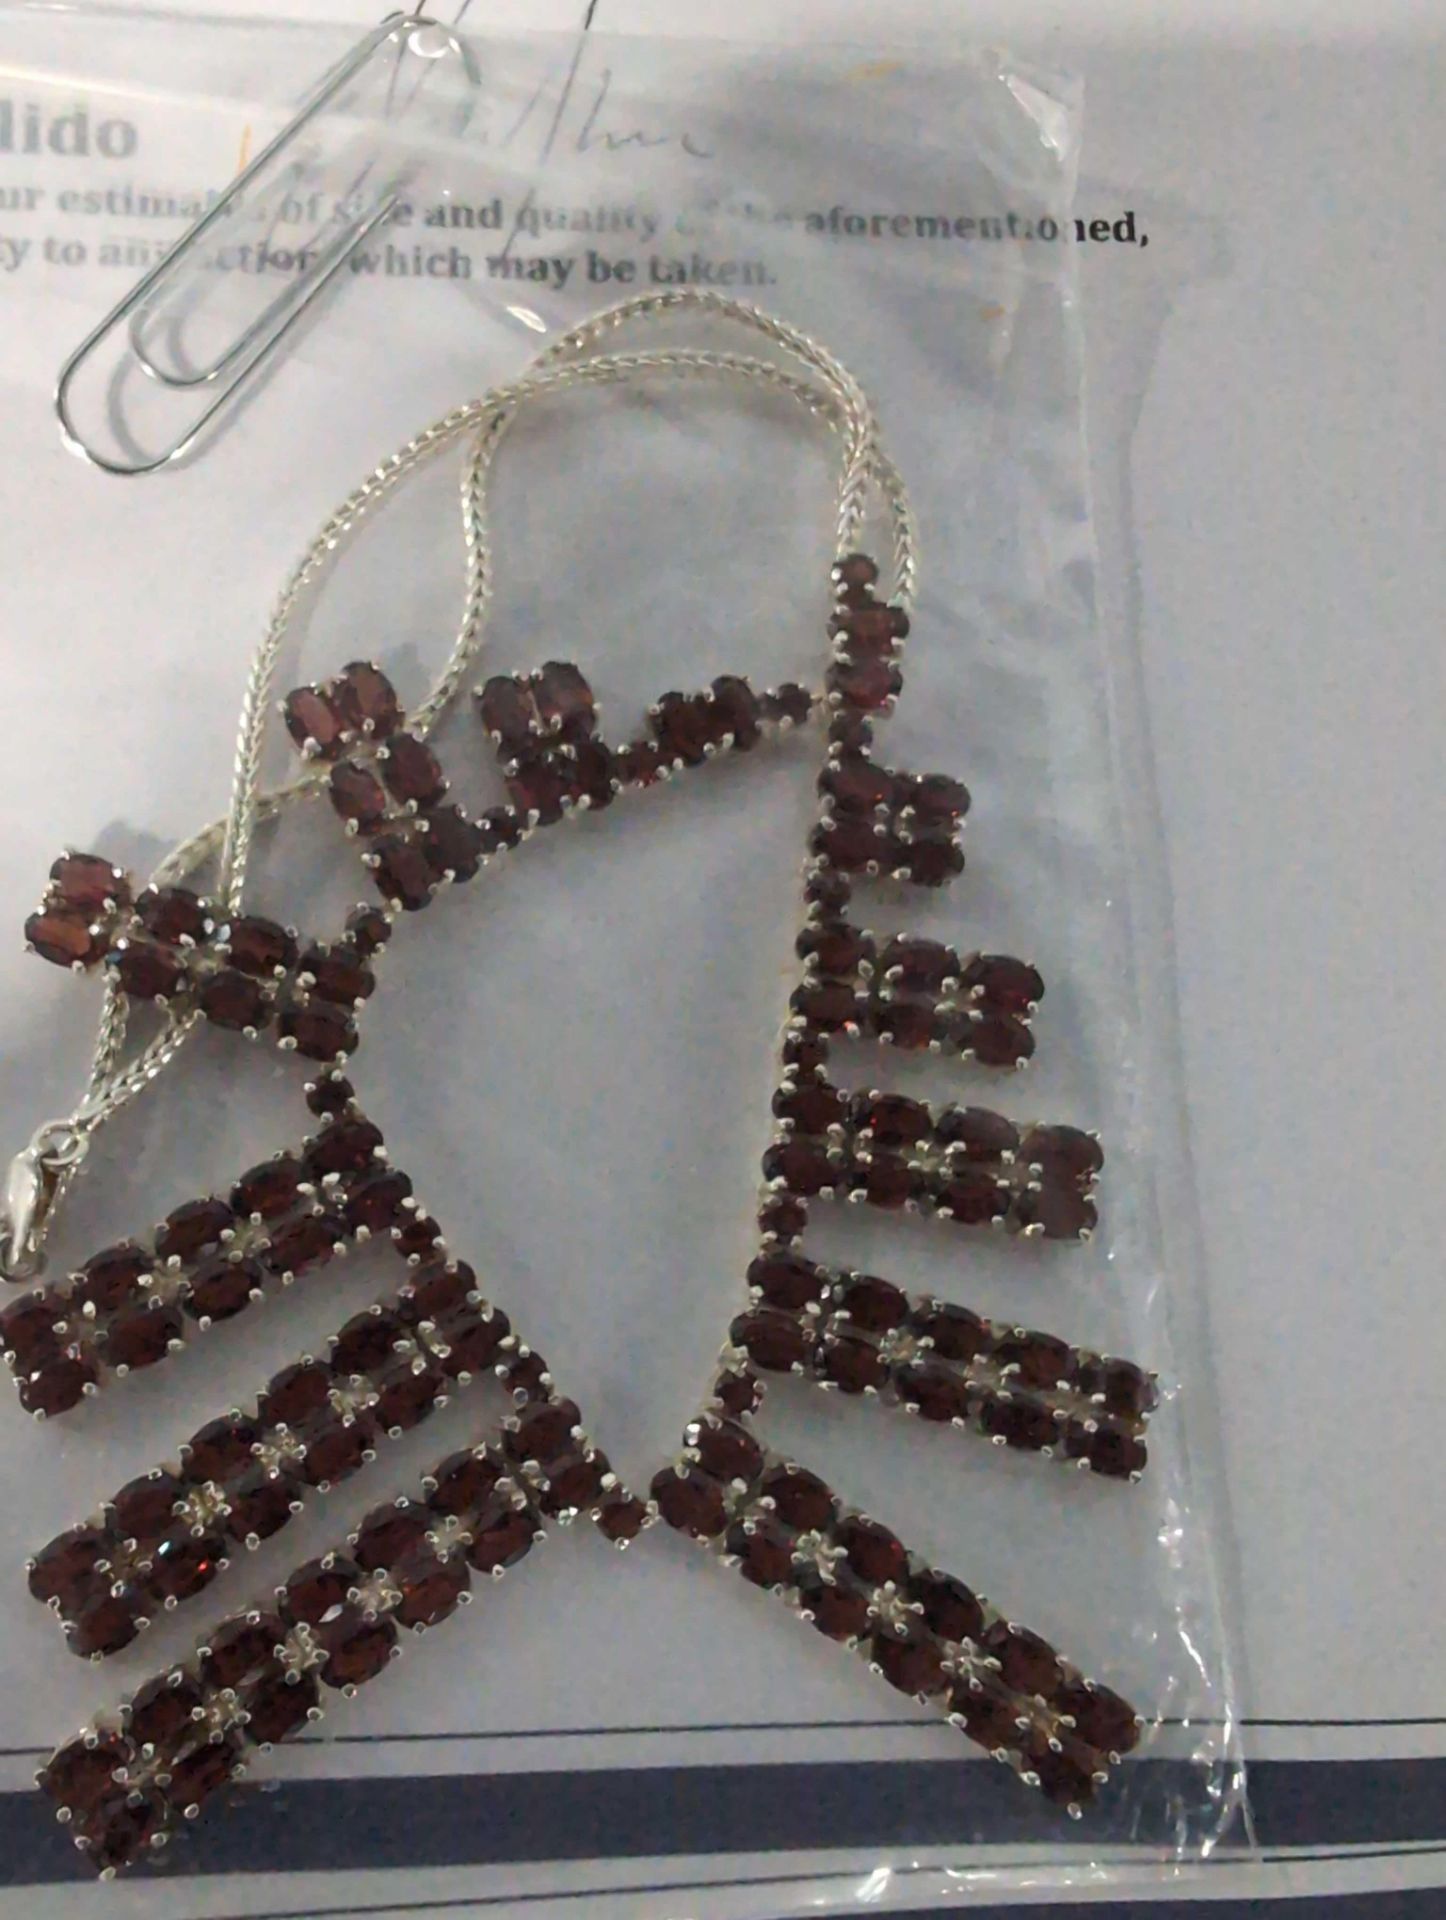 Custome Sterling Silver and garnet station necklace on a 16.5 2mm thick wheat style chain w/ apprais - Image 2 of 2